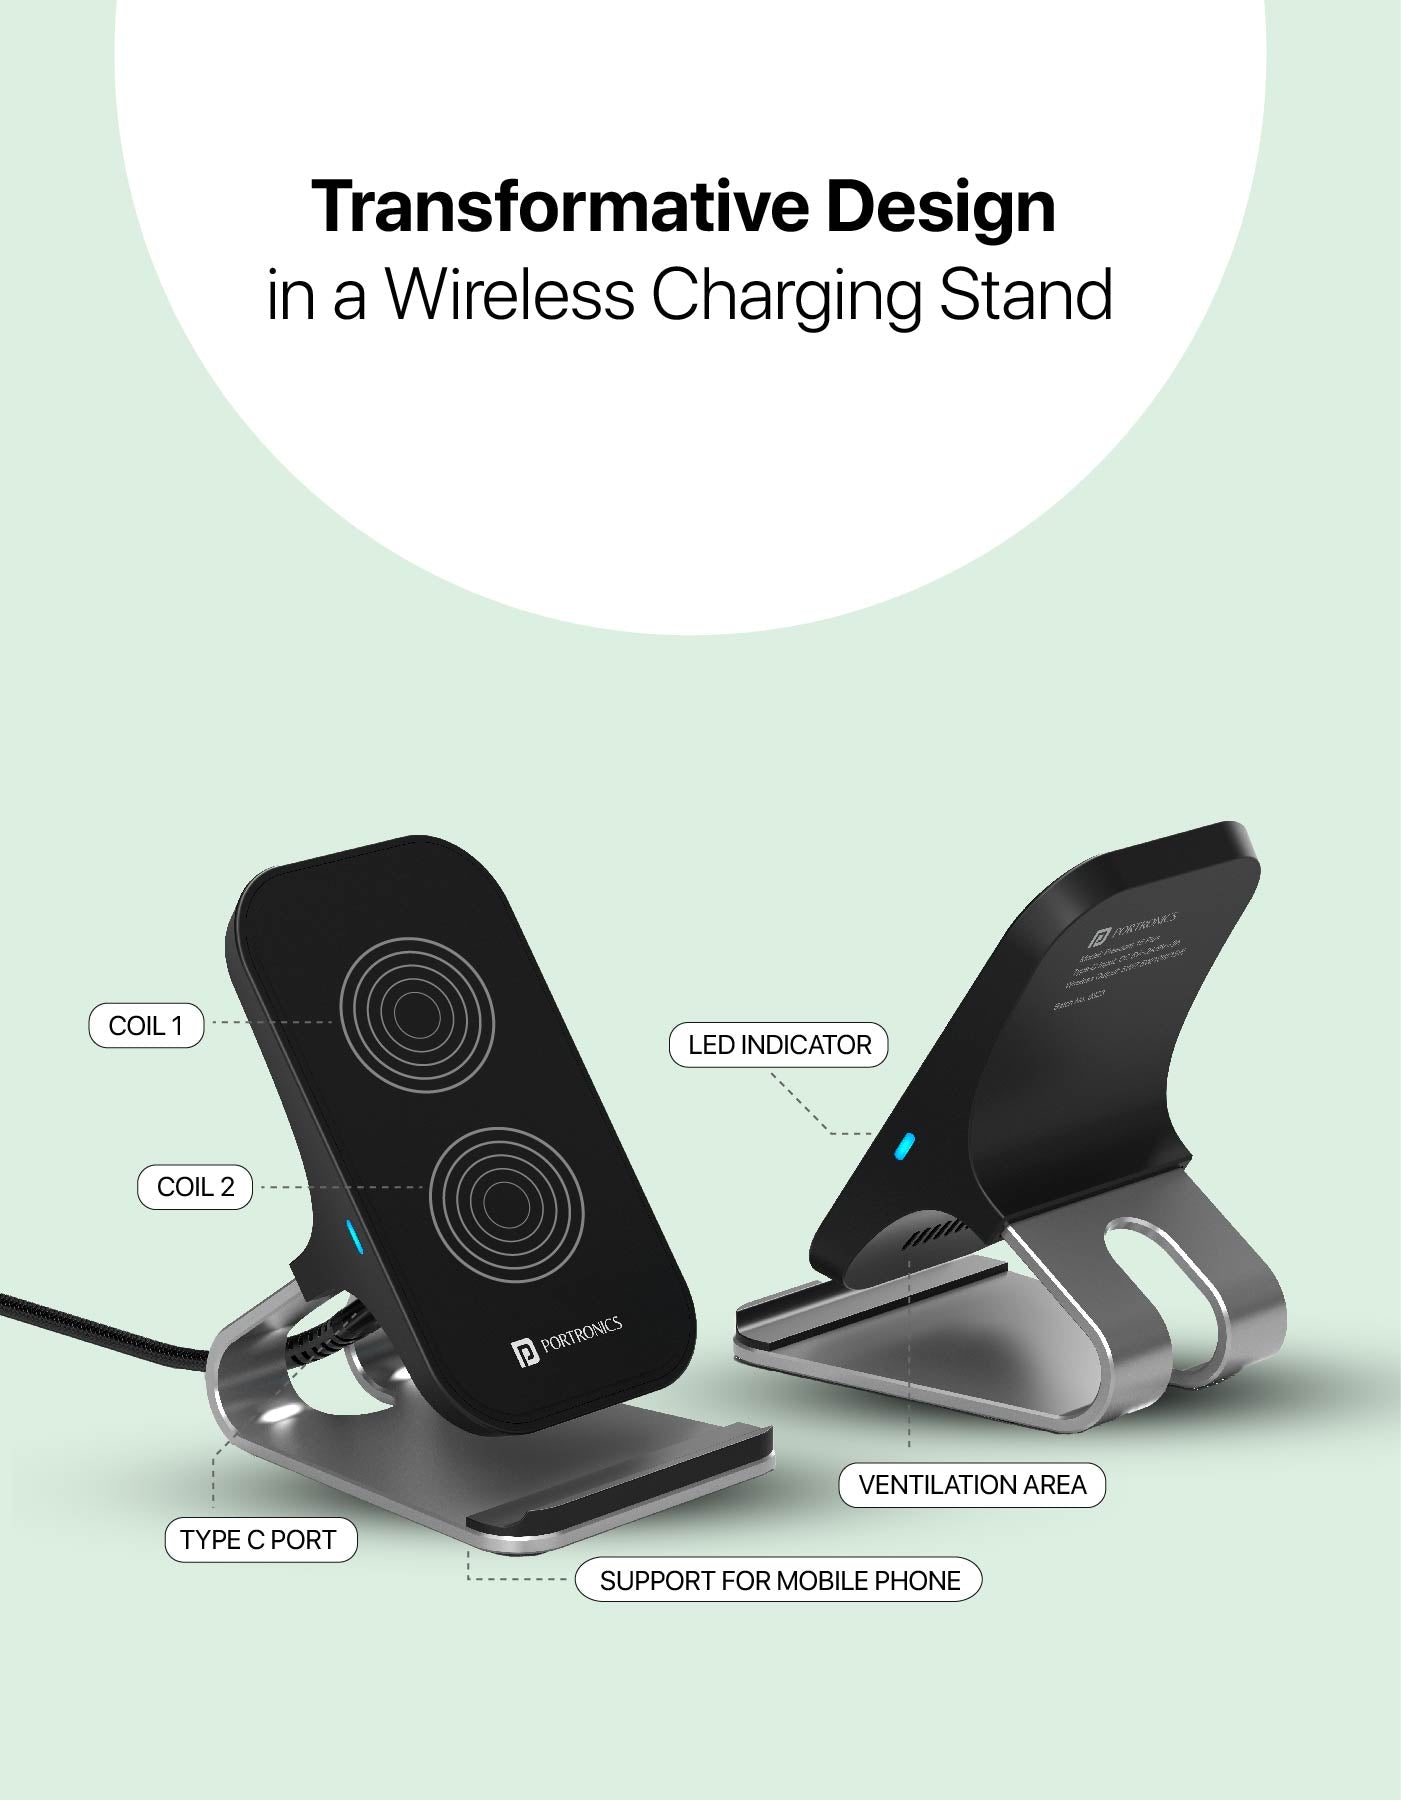 Portronics Freedom 15 Double Coil 15W Wireless Charger rapid charge 5W to 15W